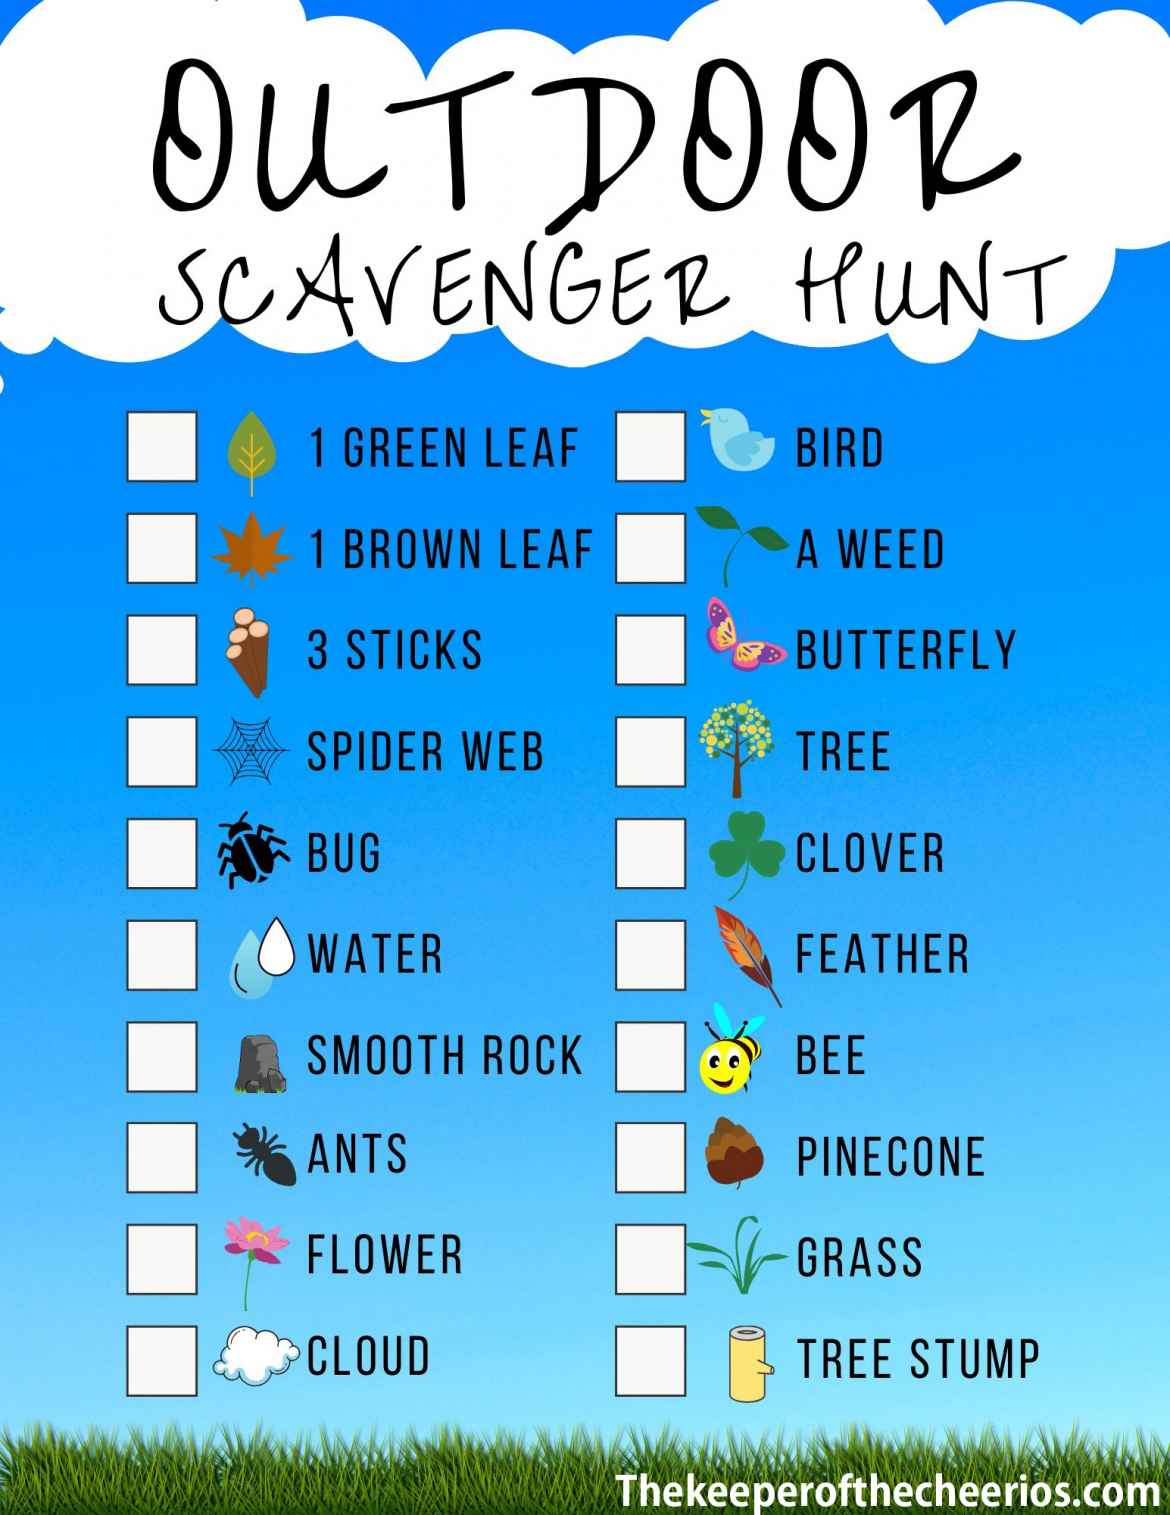 Backyard/Outdoor Scavenger Hunt Activity Sheet The Keeper of the Cheerios